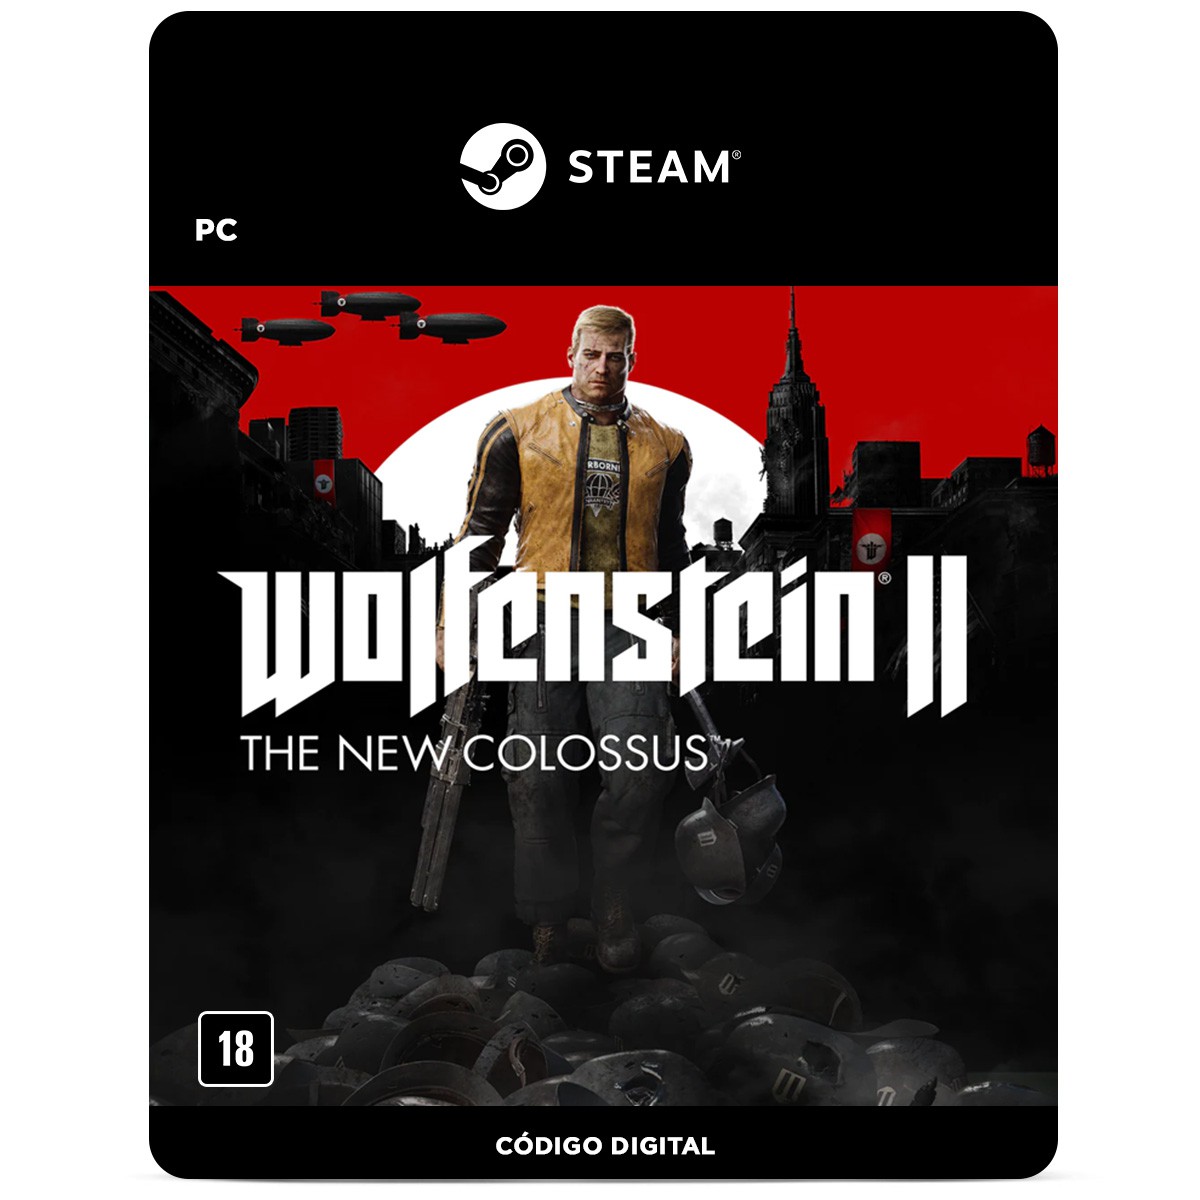 Buy Wolfenstein II: The New Colossus- Deluxe Edition Steam